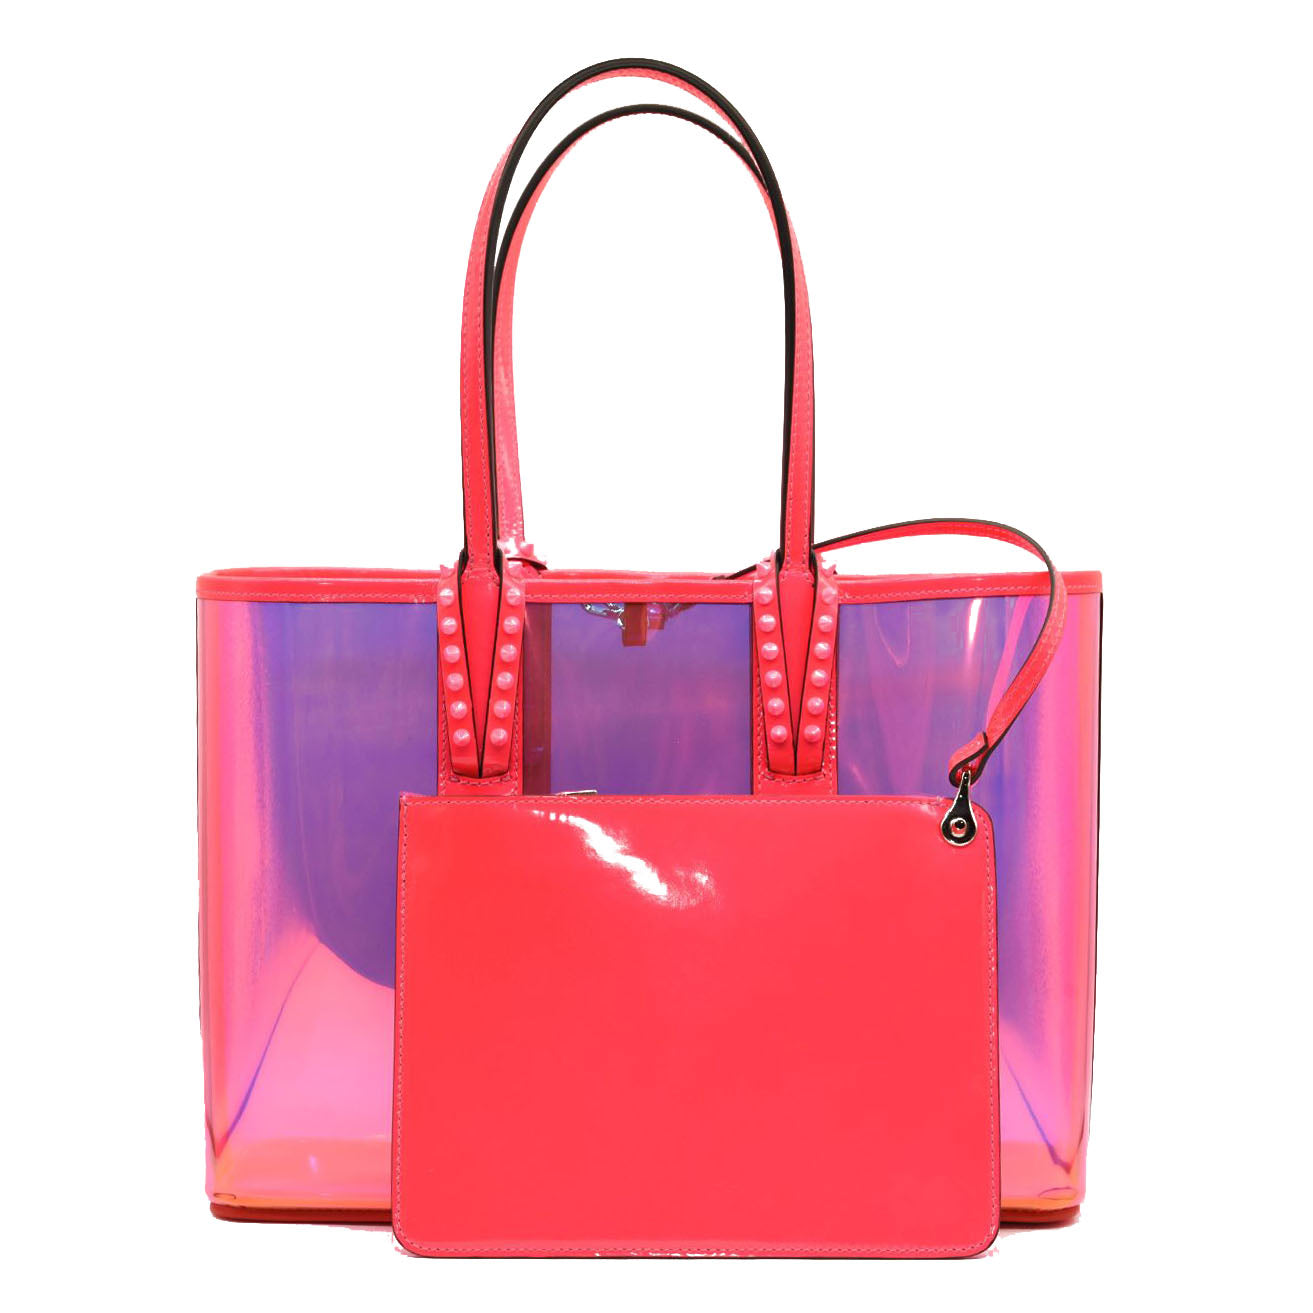 little Red bag pvc tote purse 